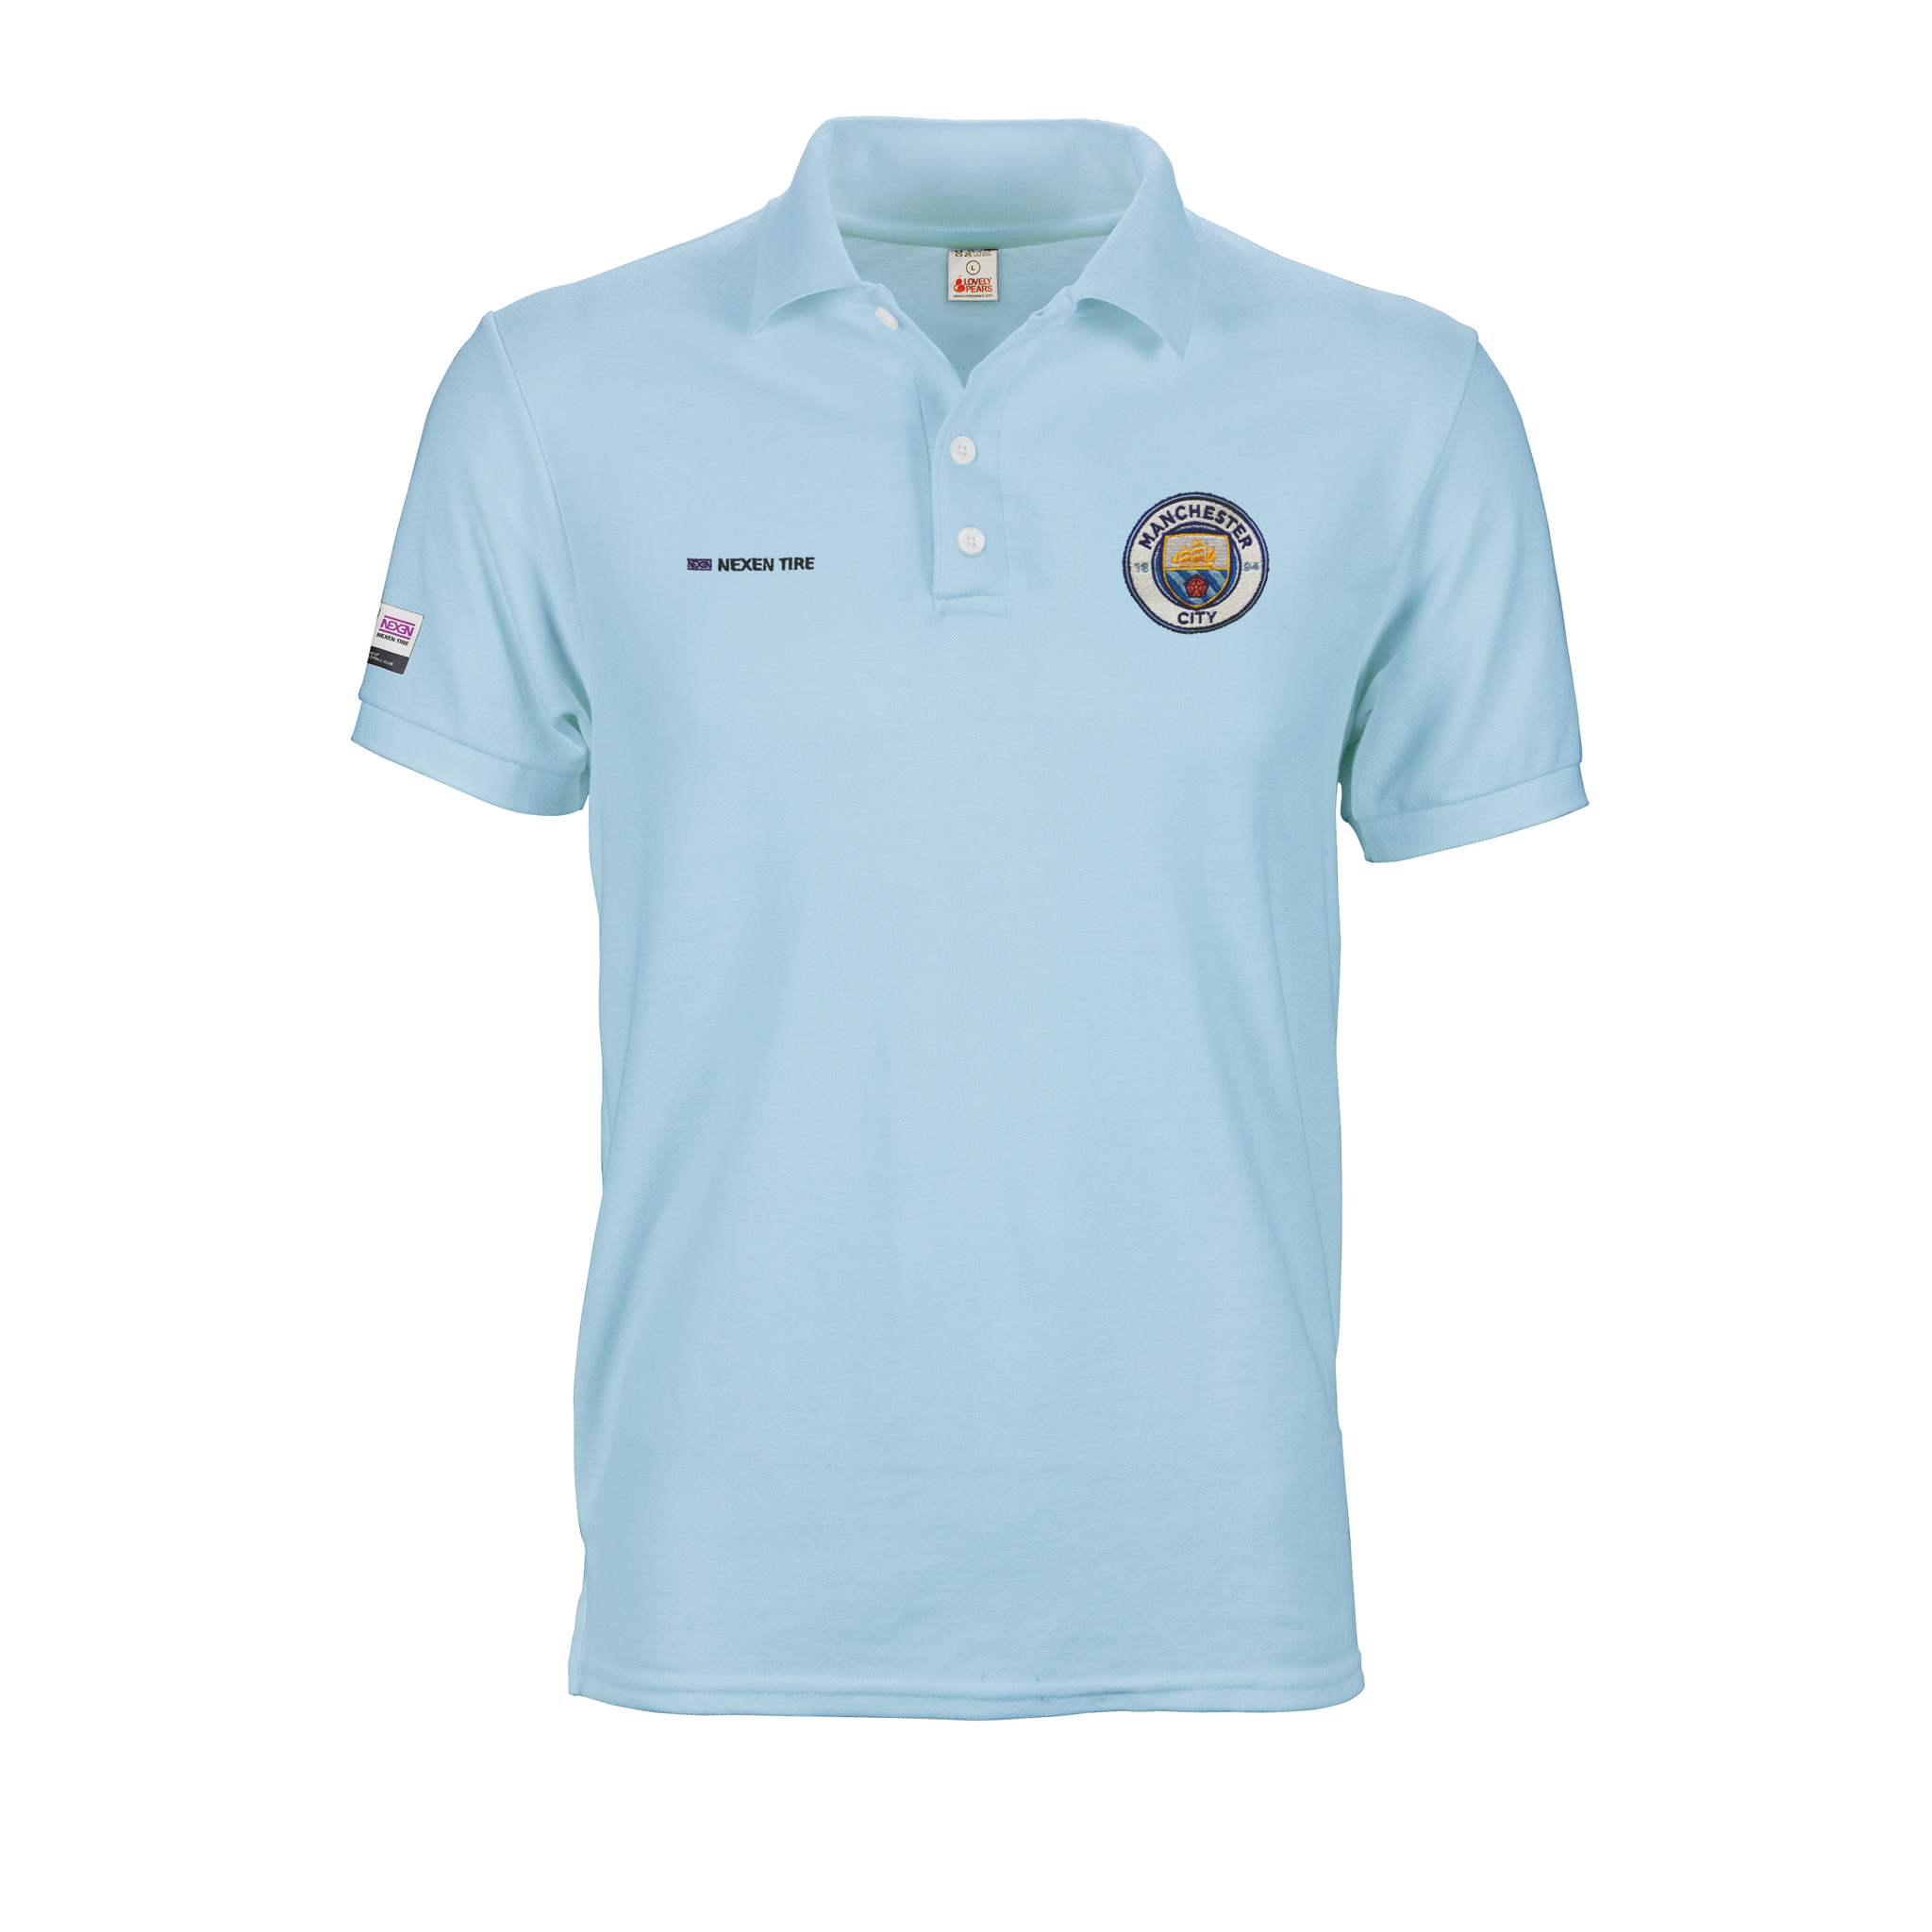 Light blue Manchester City polo tee shirt with A6 logo prints and embroidery on front and sleeve